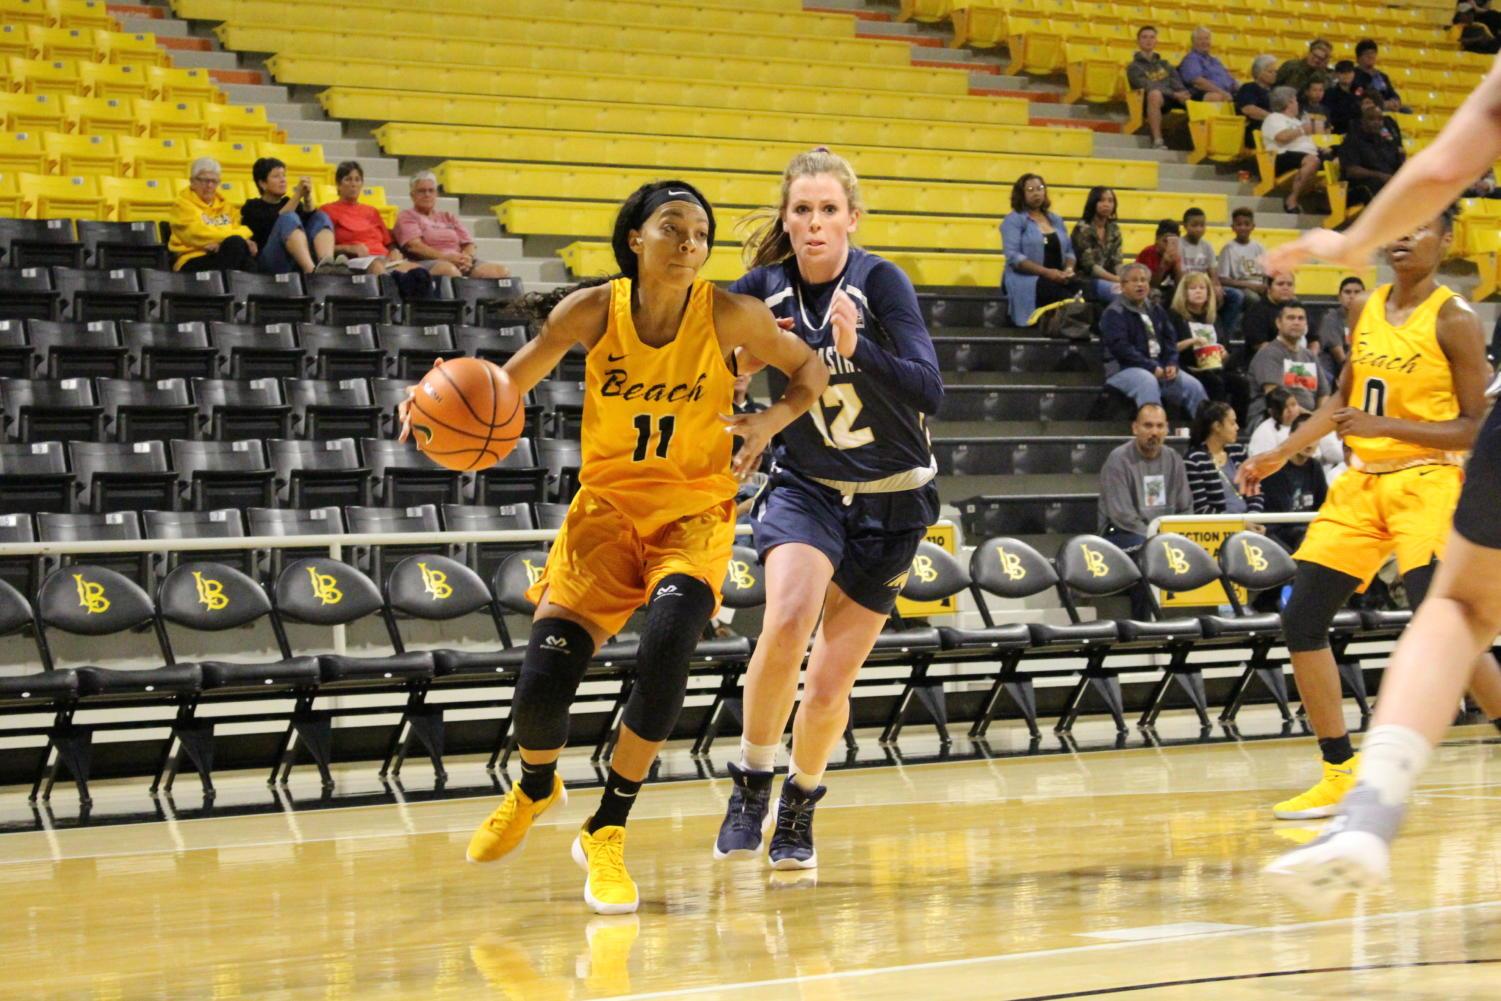 Long Beach State junior guard Martina McCowan dribbles the ball in Sunday's game against Montana State in the Walter Pyramid.